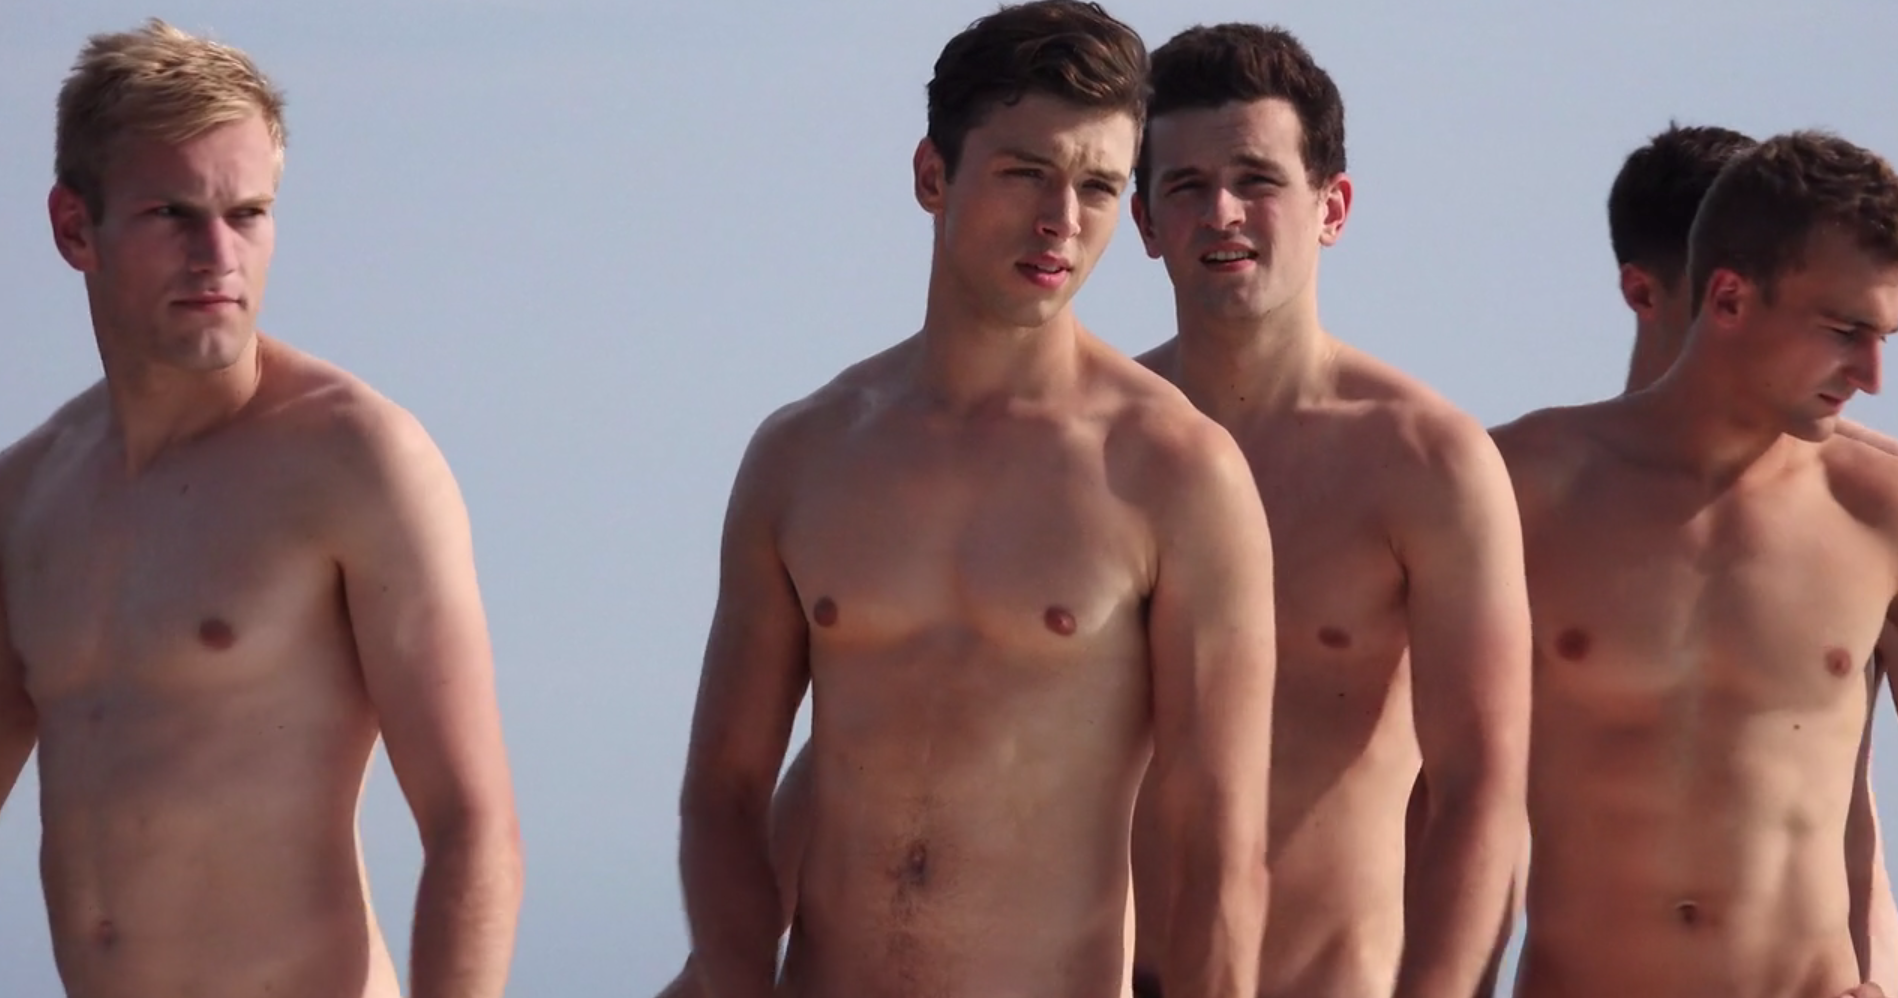 Naked rowers are back with even more (or less) for gay charity